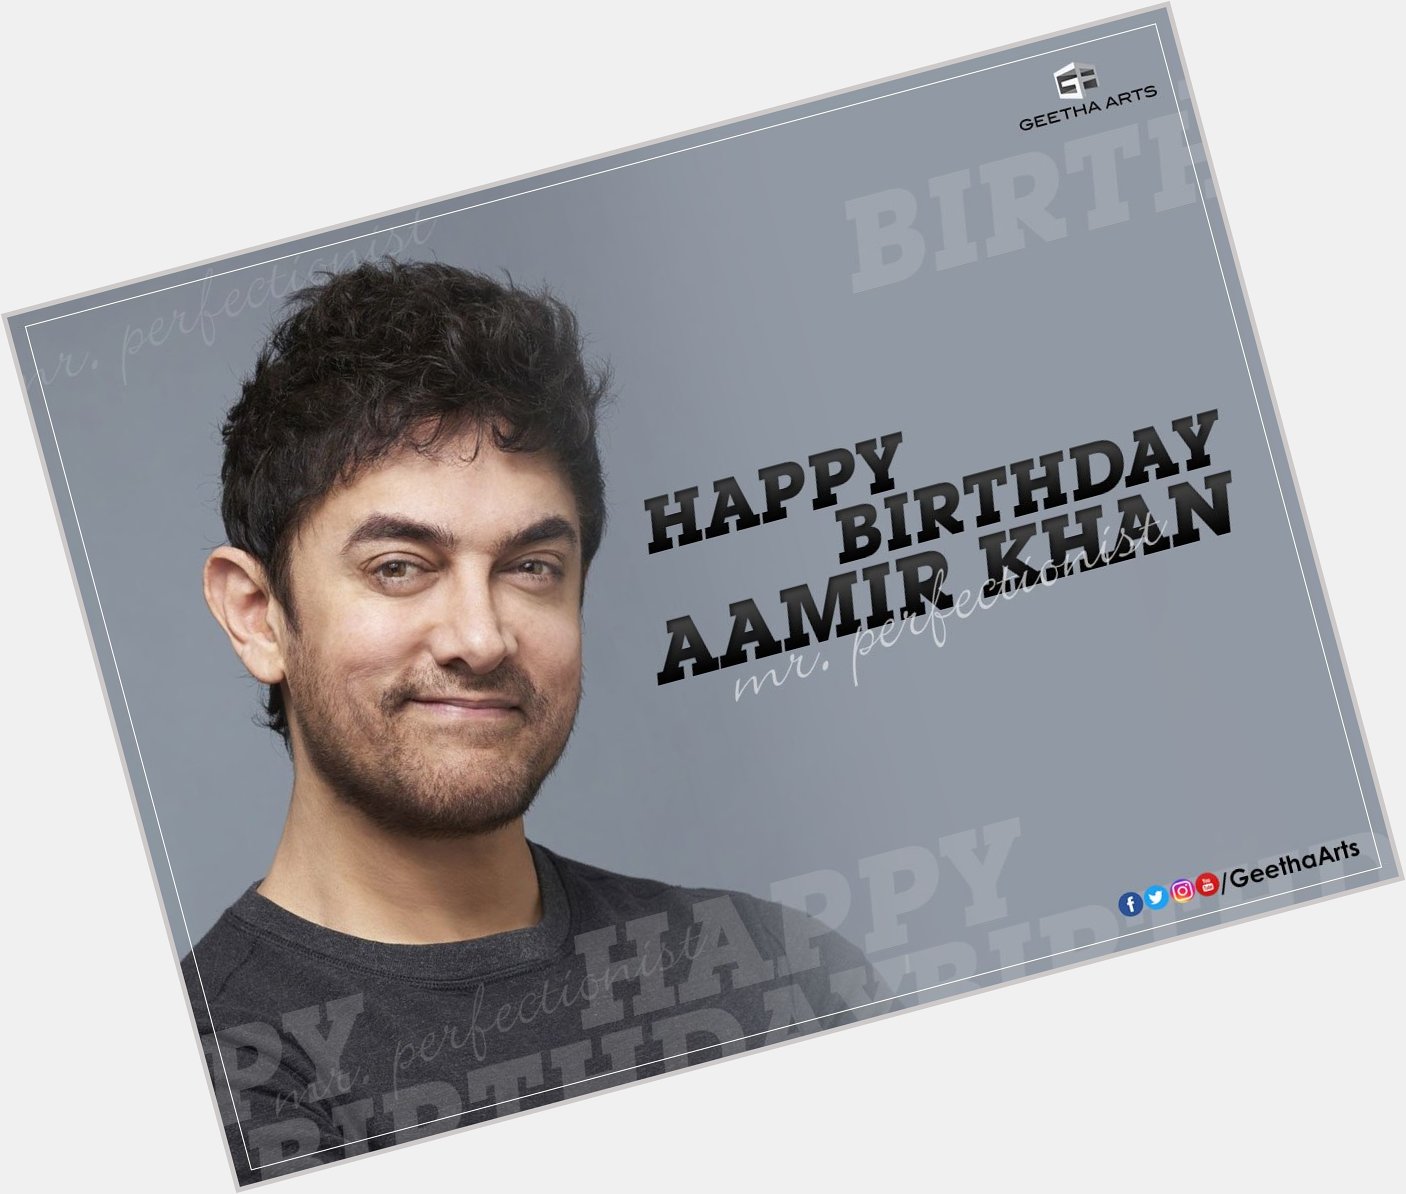 Wishing the Mr. Perfectionist a very happy birthday! 